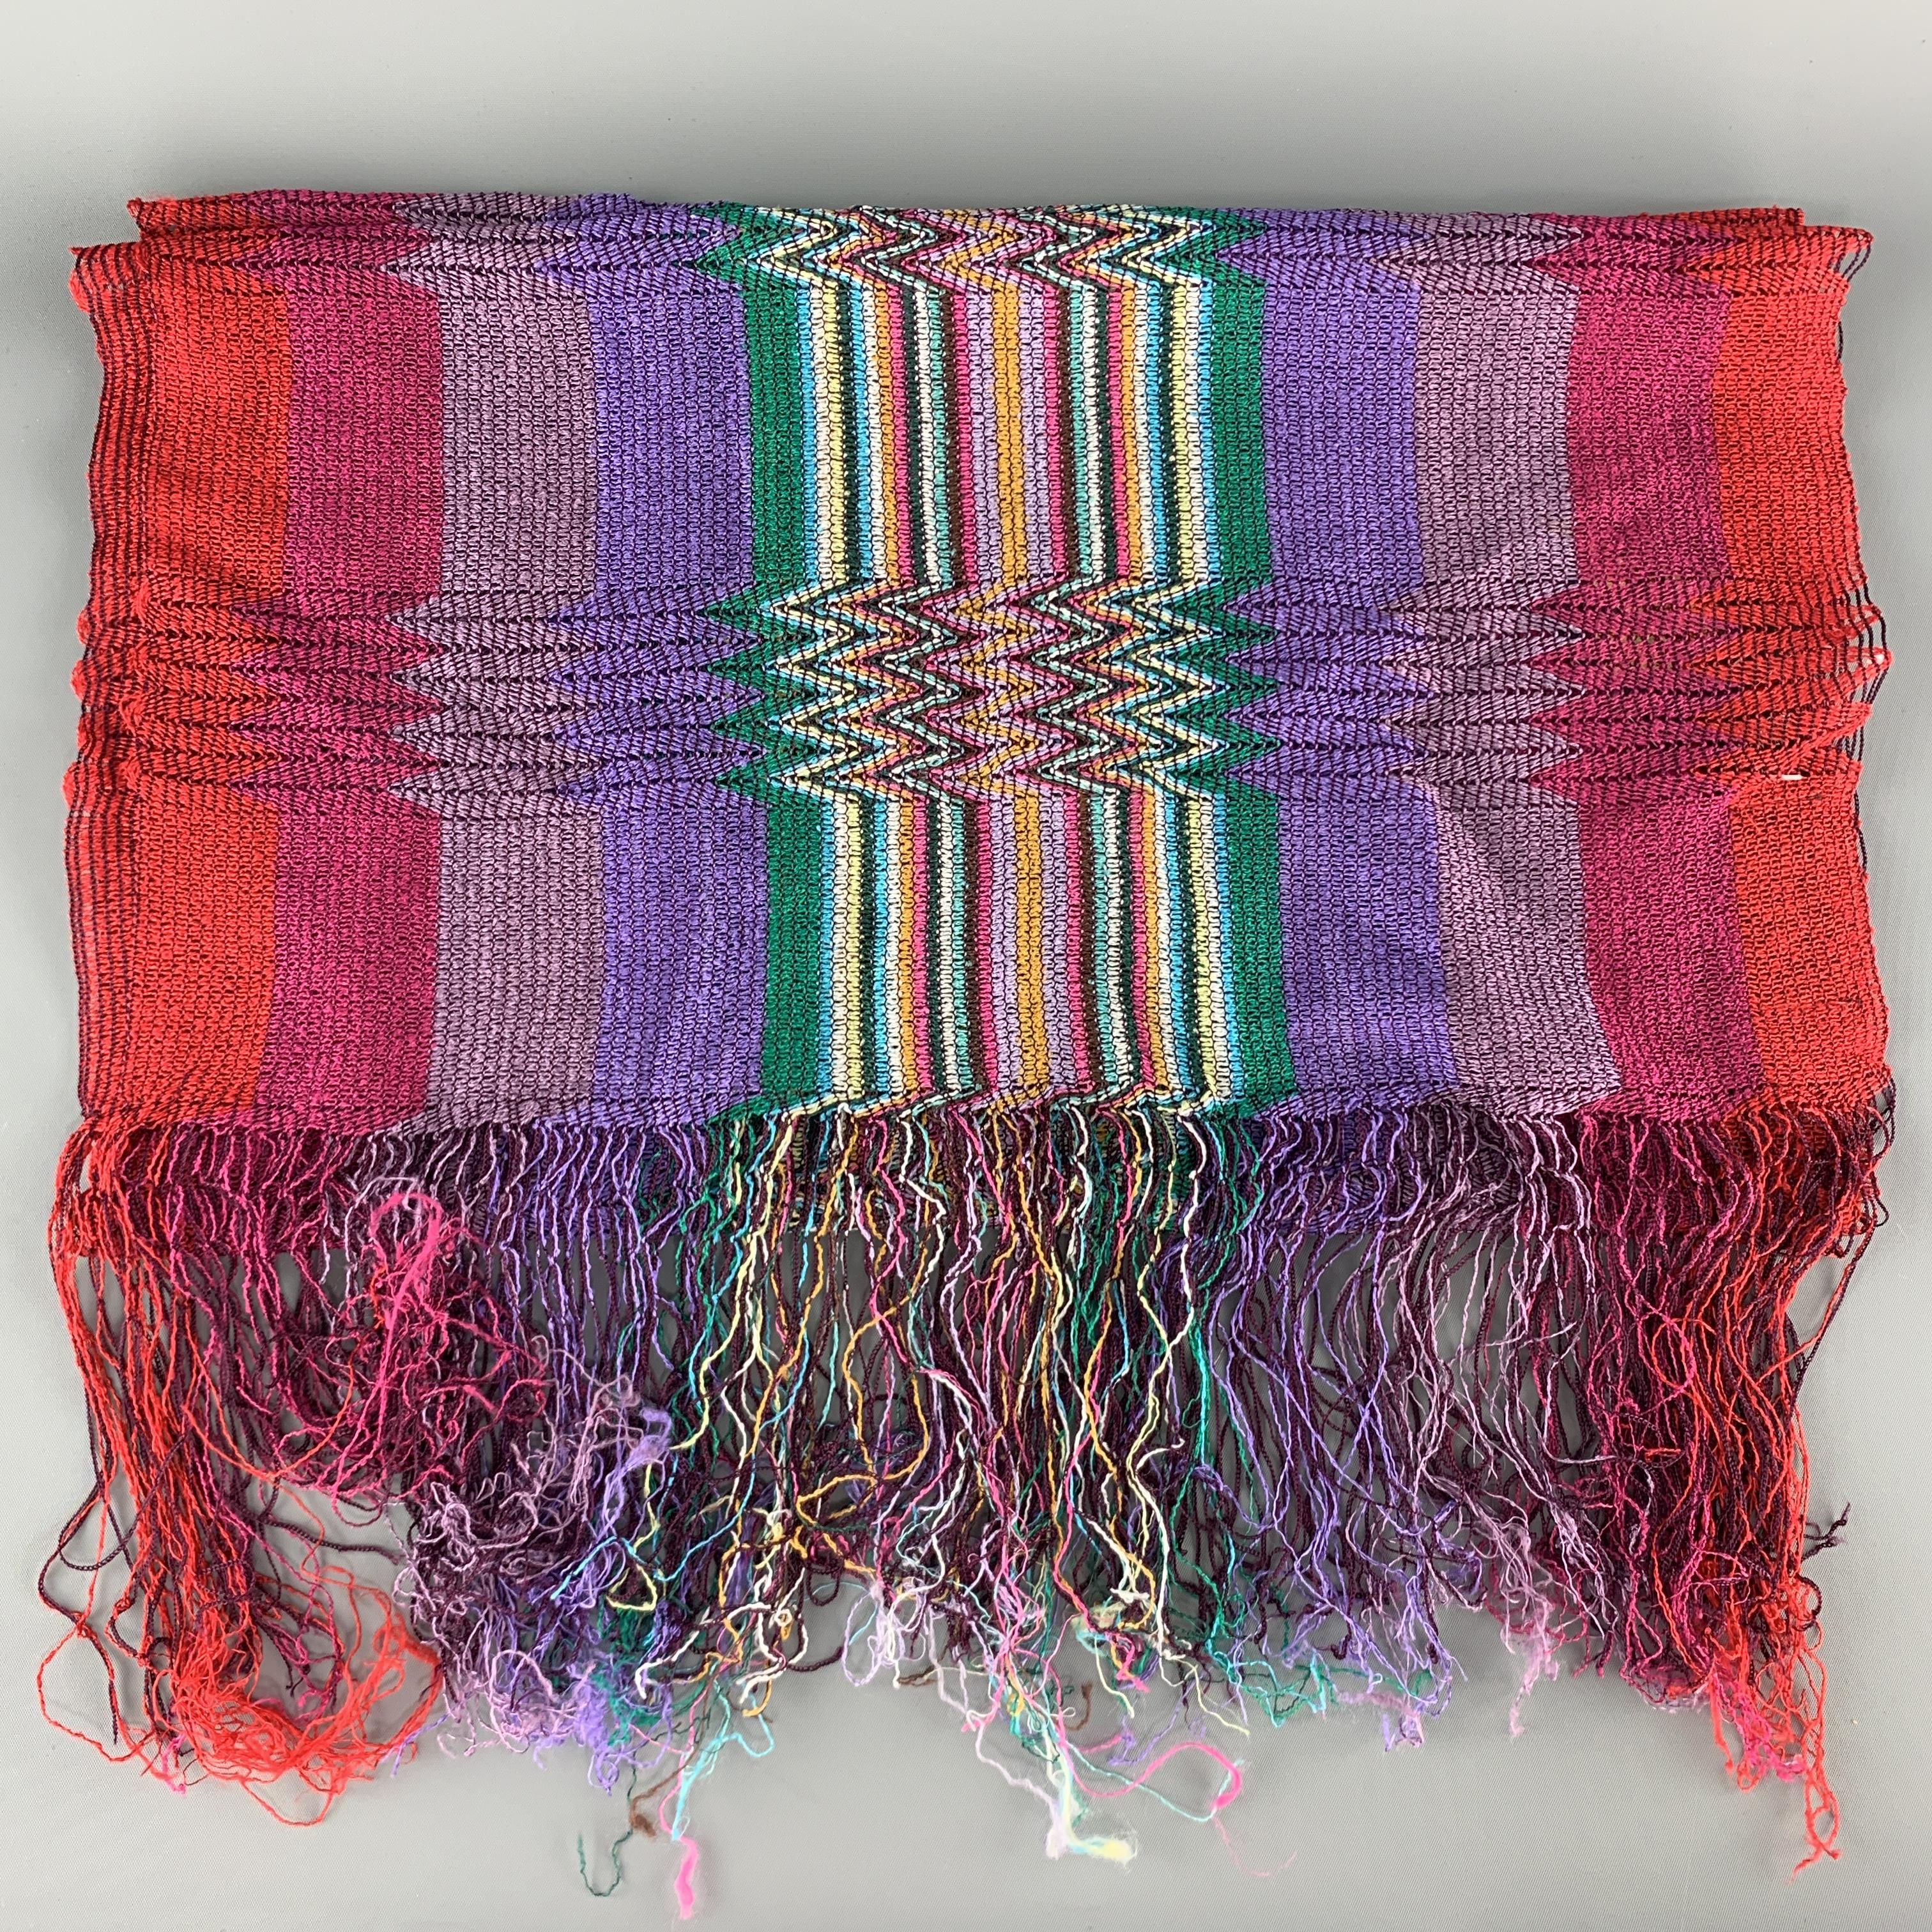 MISSONI scarf comes in multi color striped pleated textured viscose knit with fringe ends. Made in Italy.

Very Good Pre-Owned Condition.

88 x 20 in.